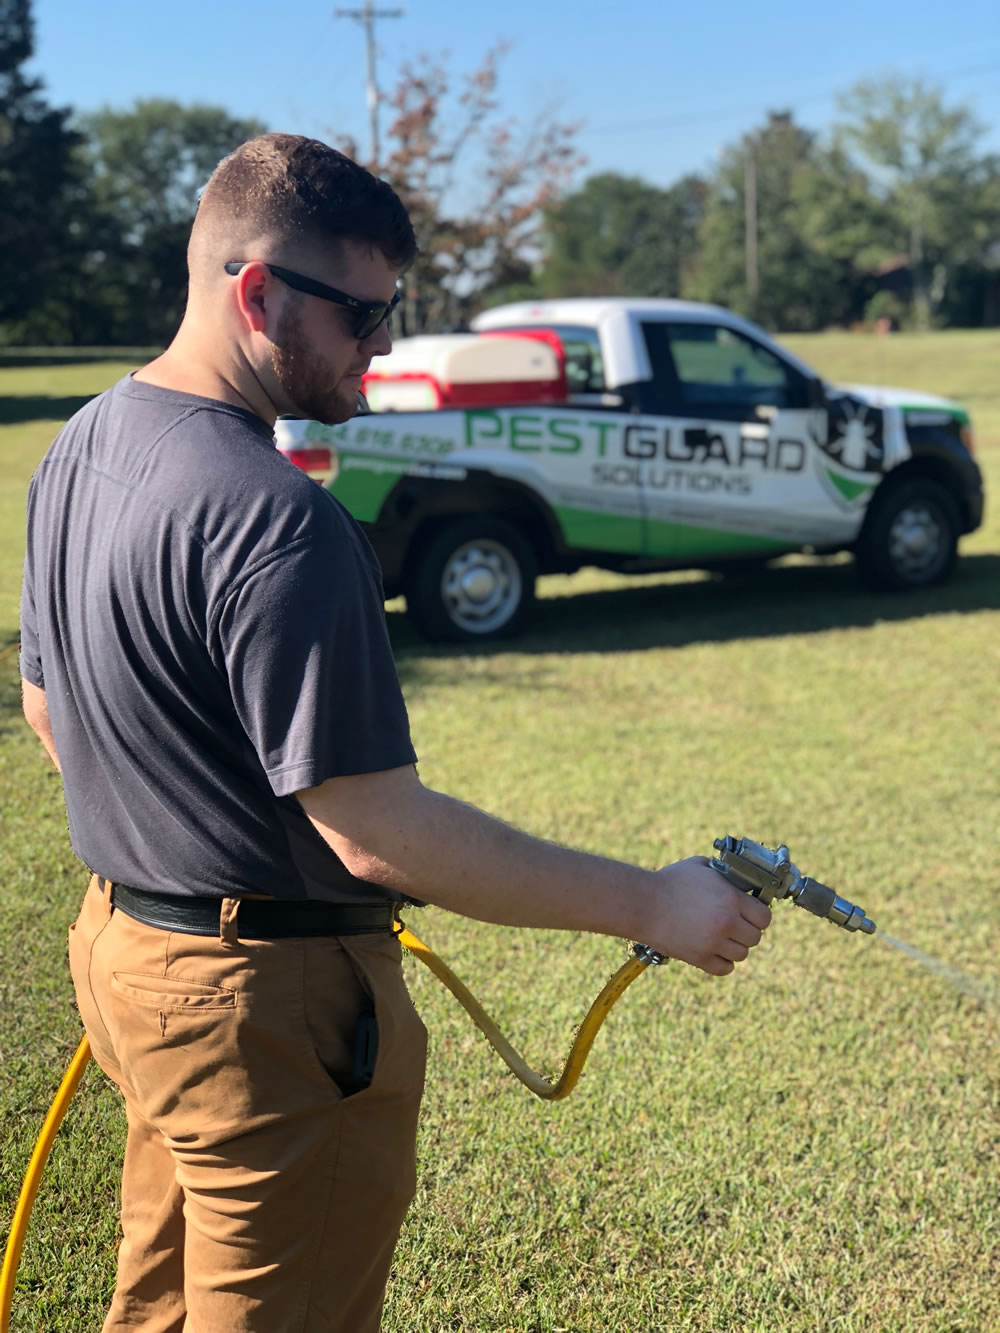 Pest Control and Exermination Company Greenville SC